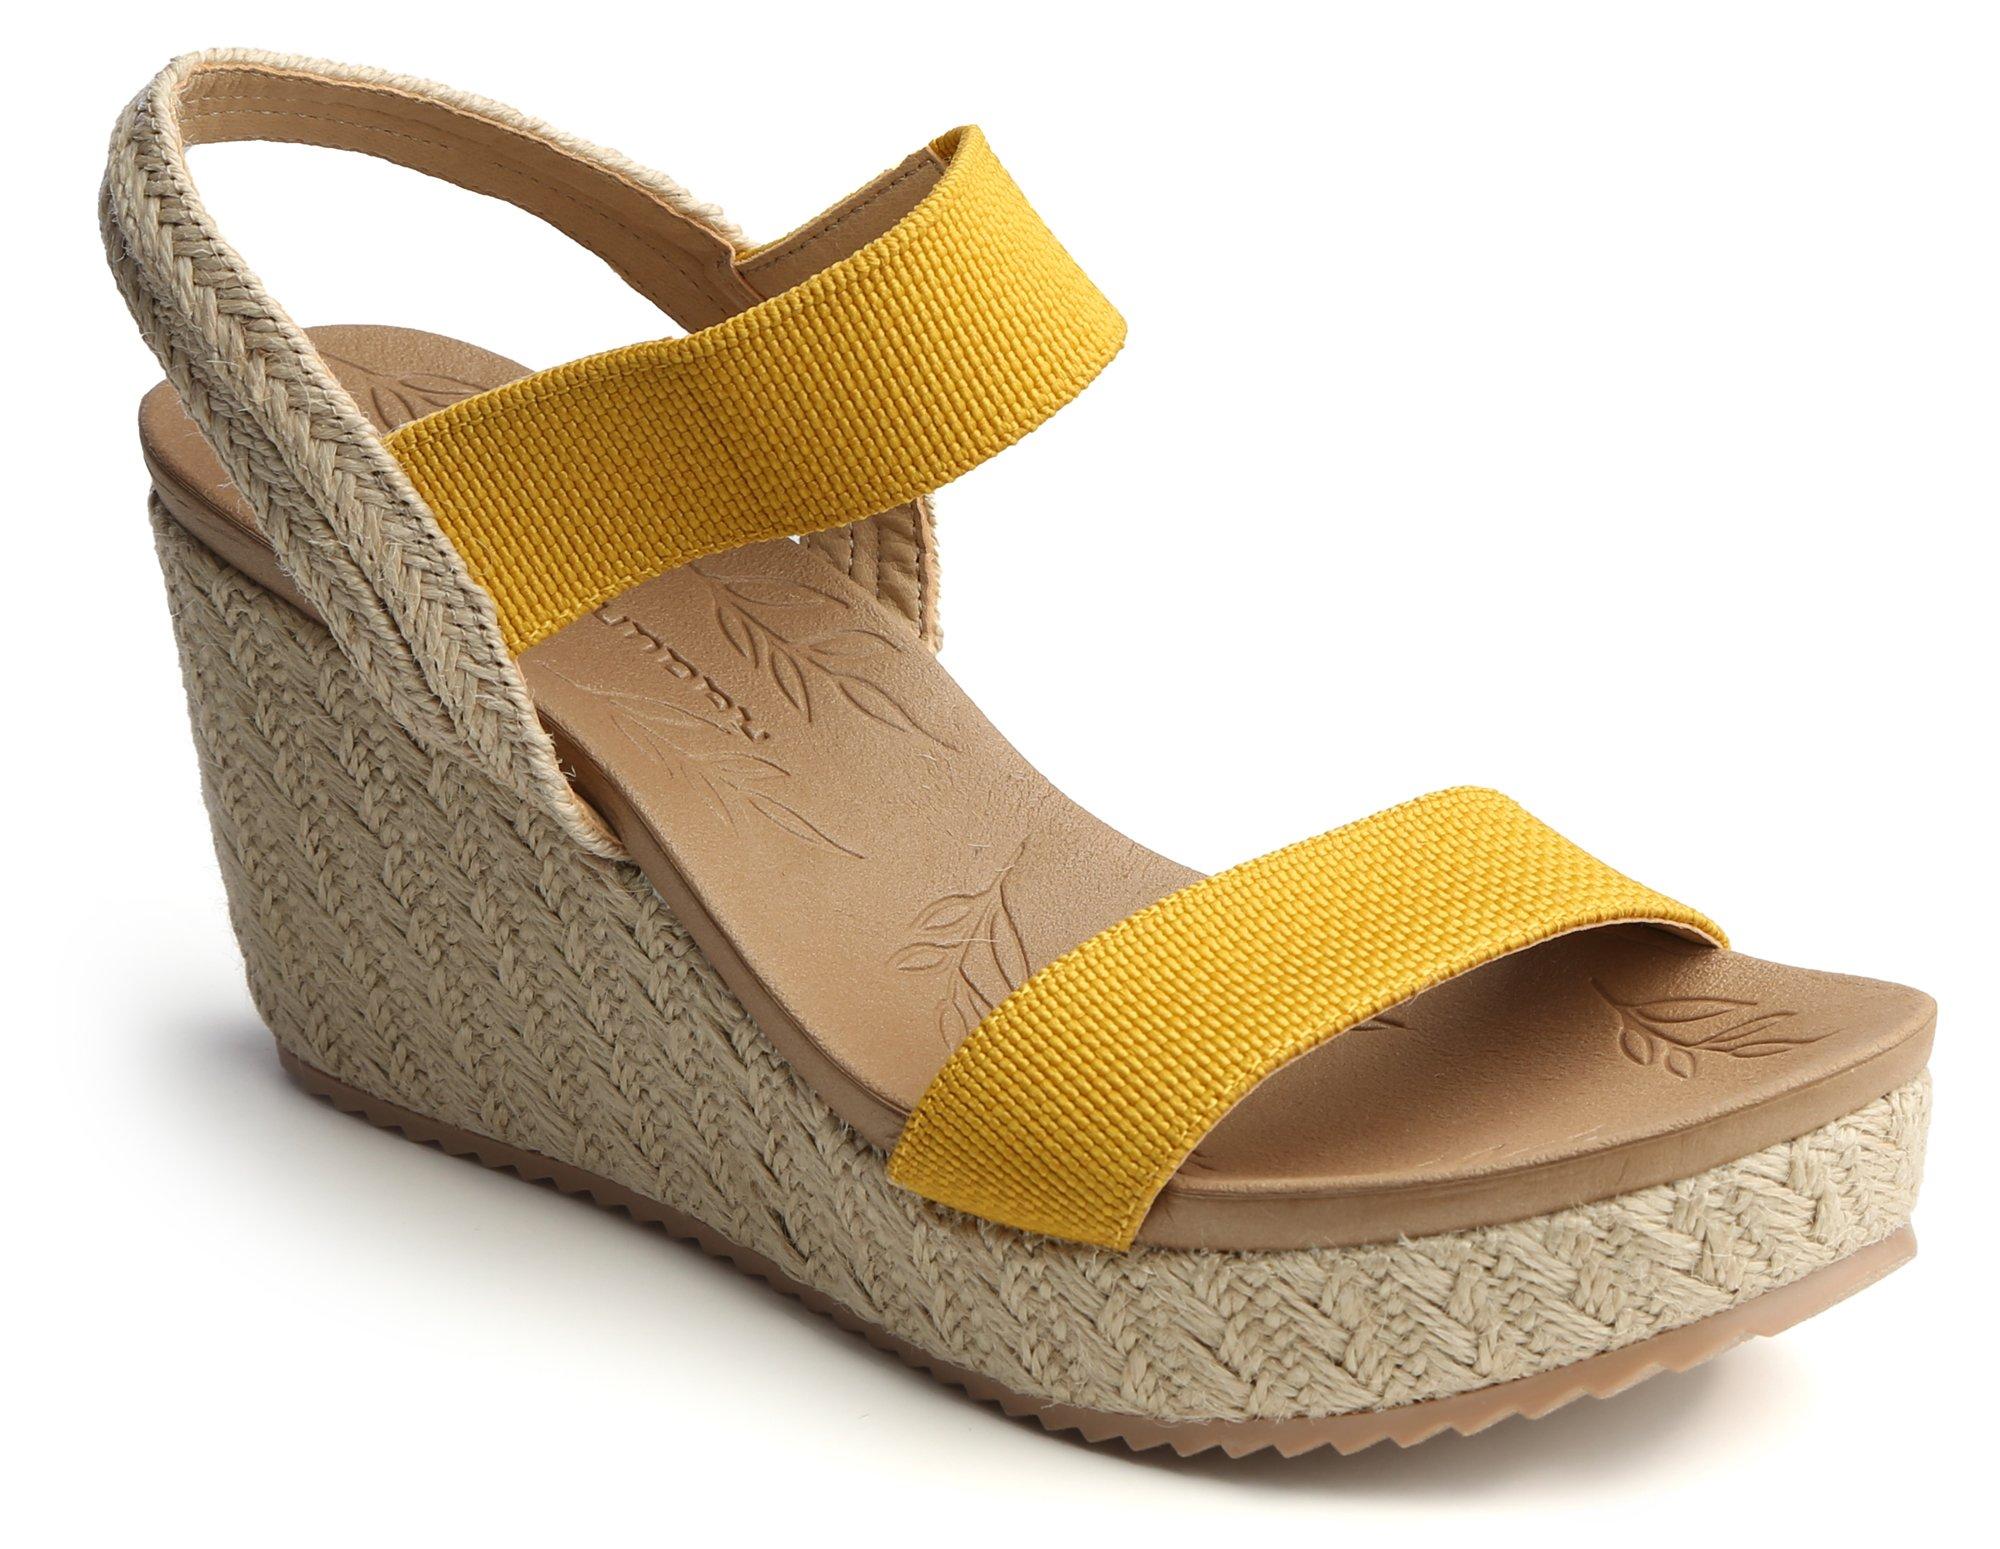 Women's Double Band Espadrille Wedges